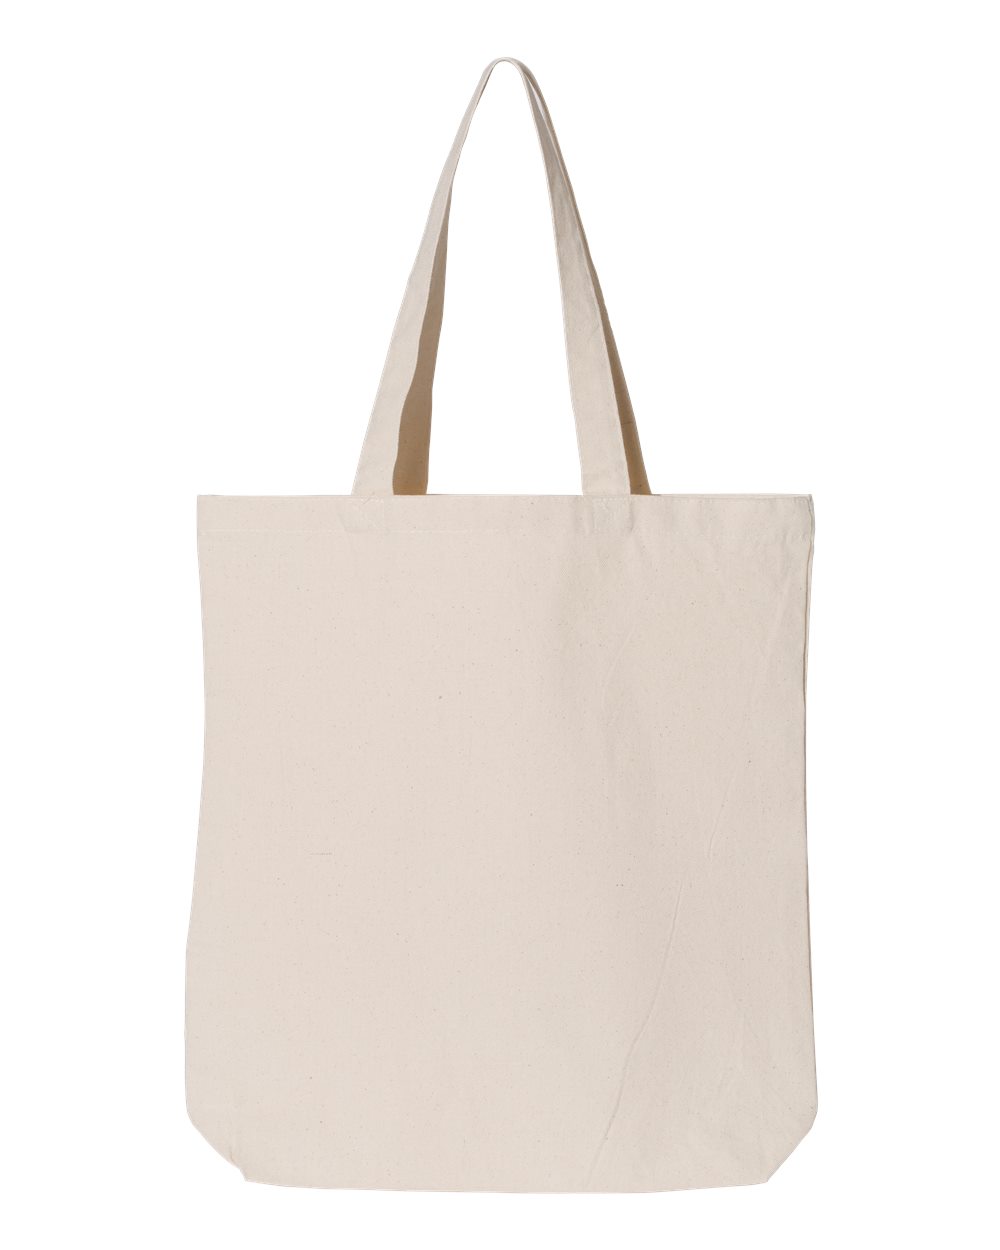 OAD OAD106 Gusseted Tote Bag :: Natural